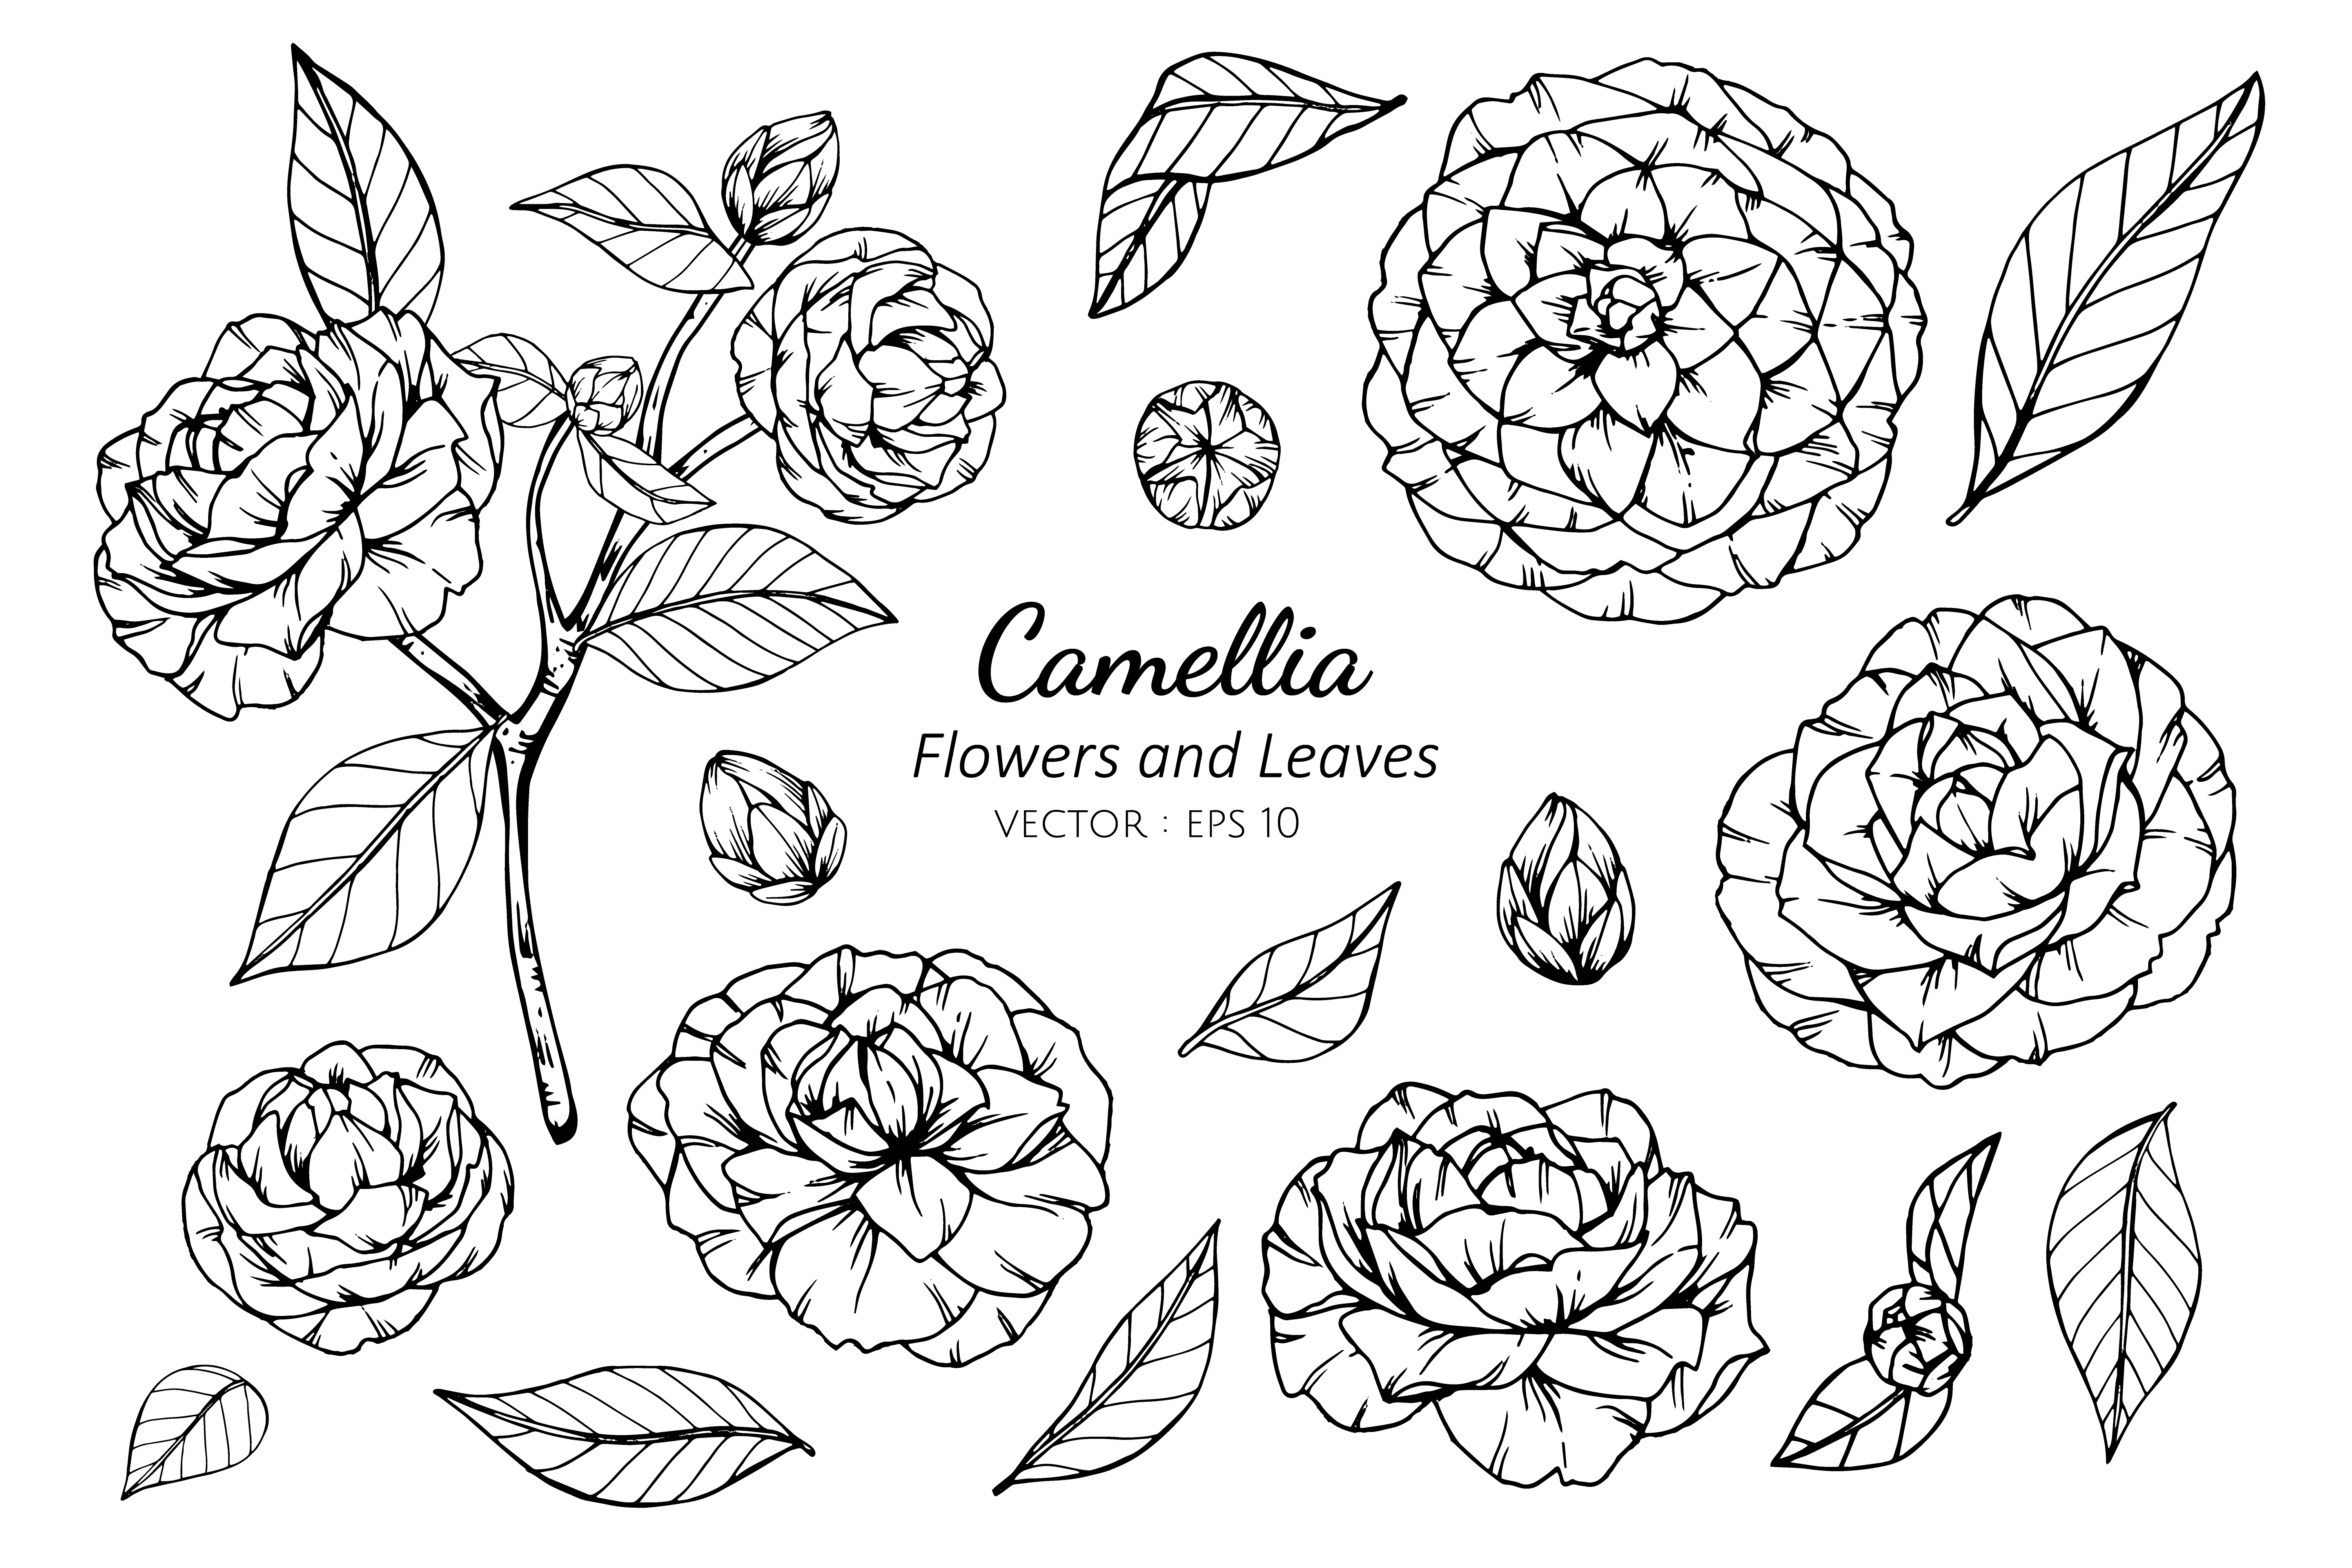 How To Draw A Camellia : Camellia 1 | Flower drawing, Color pencil